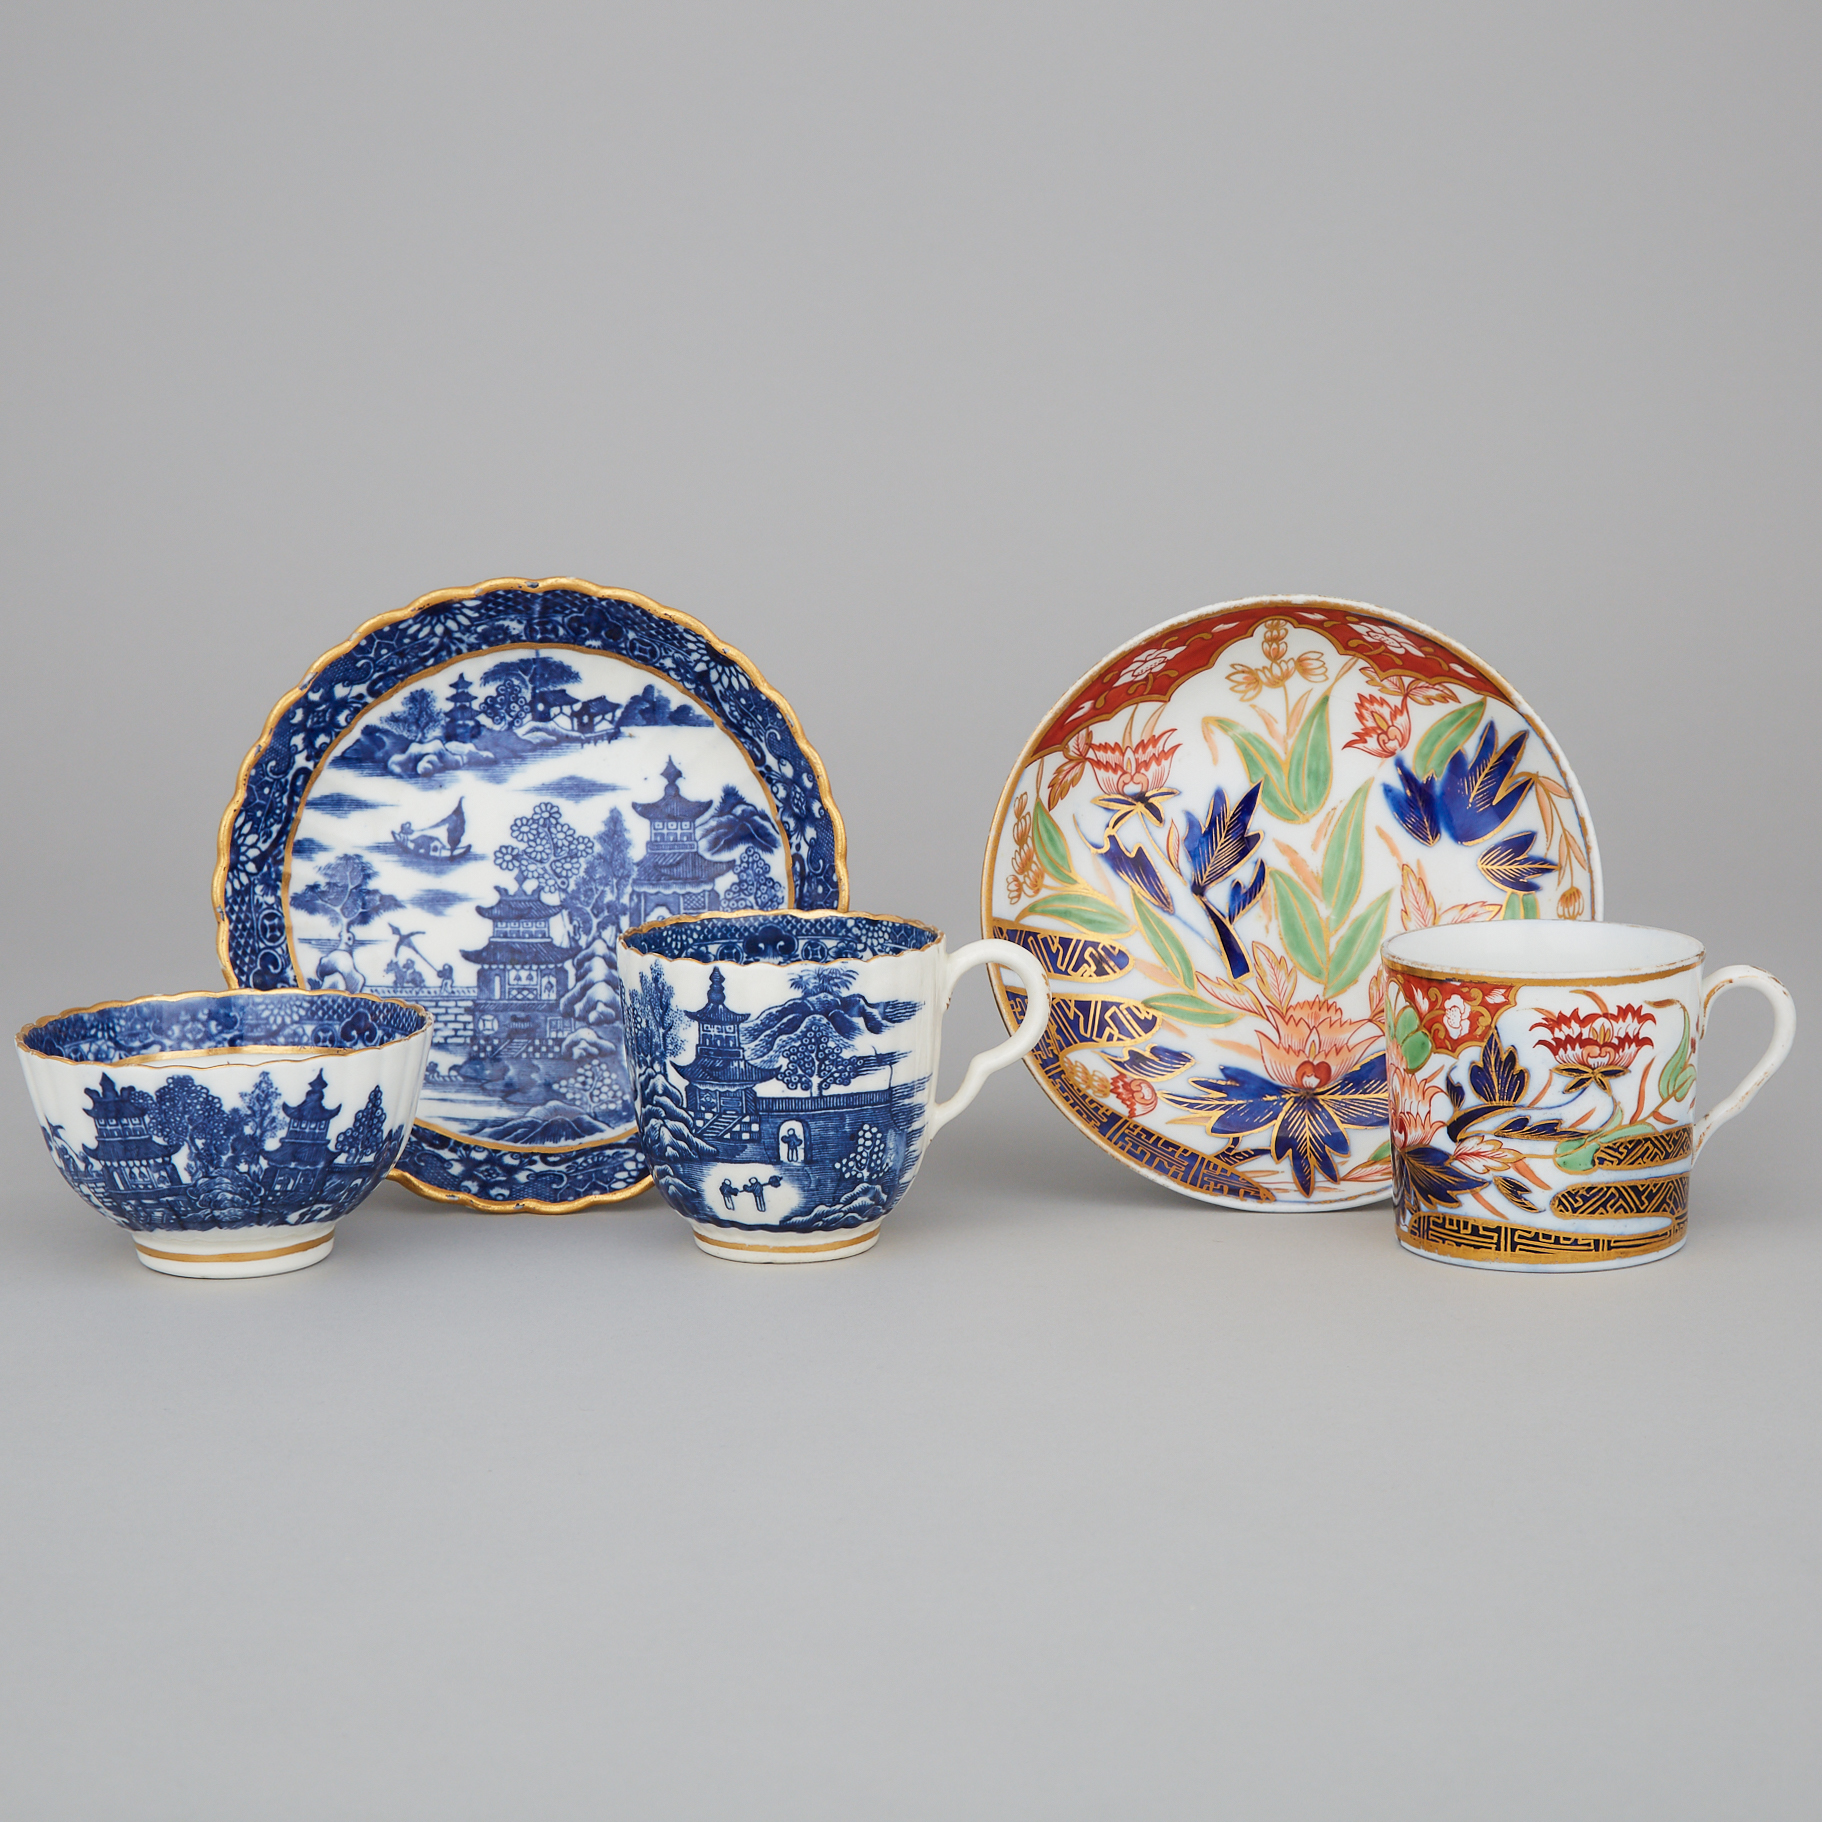 Caughley Blue-Printed 'Conversation' Pattern Trio and a Coalport 'Finger and Thumb' Japan Pattern Coffee Can and Saucer, late 18th/early 19th century